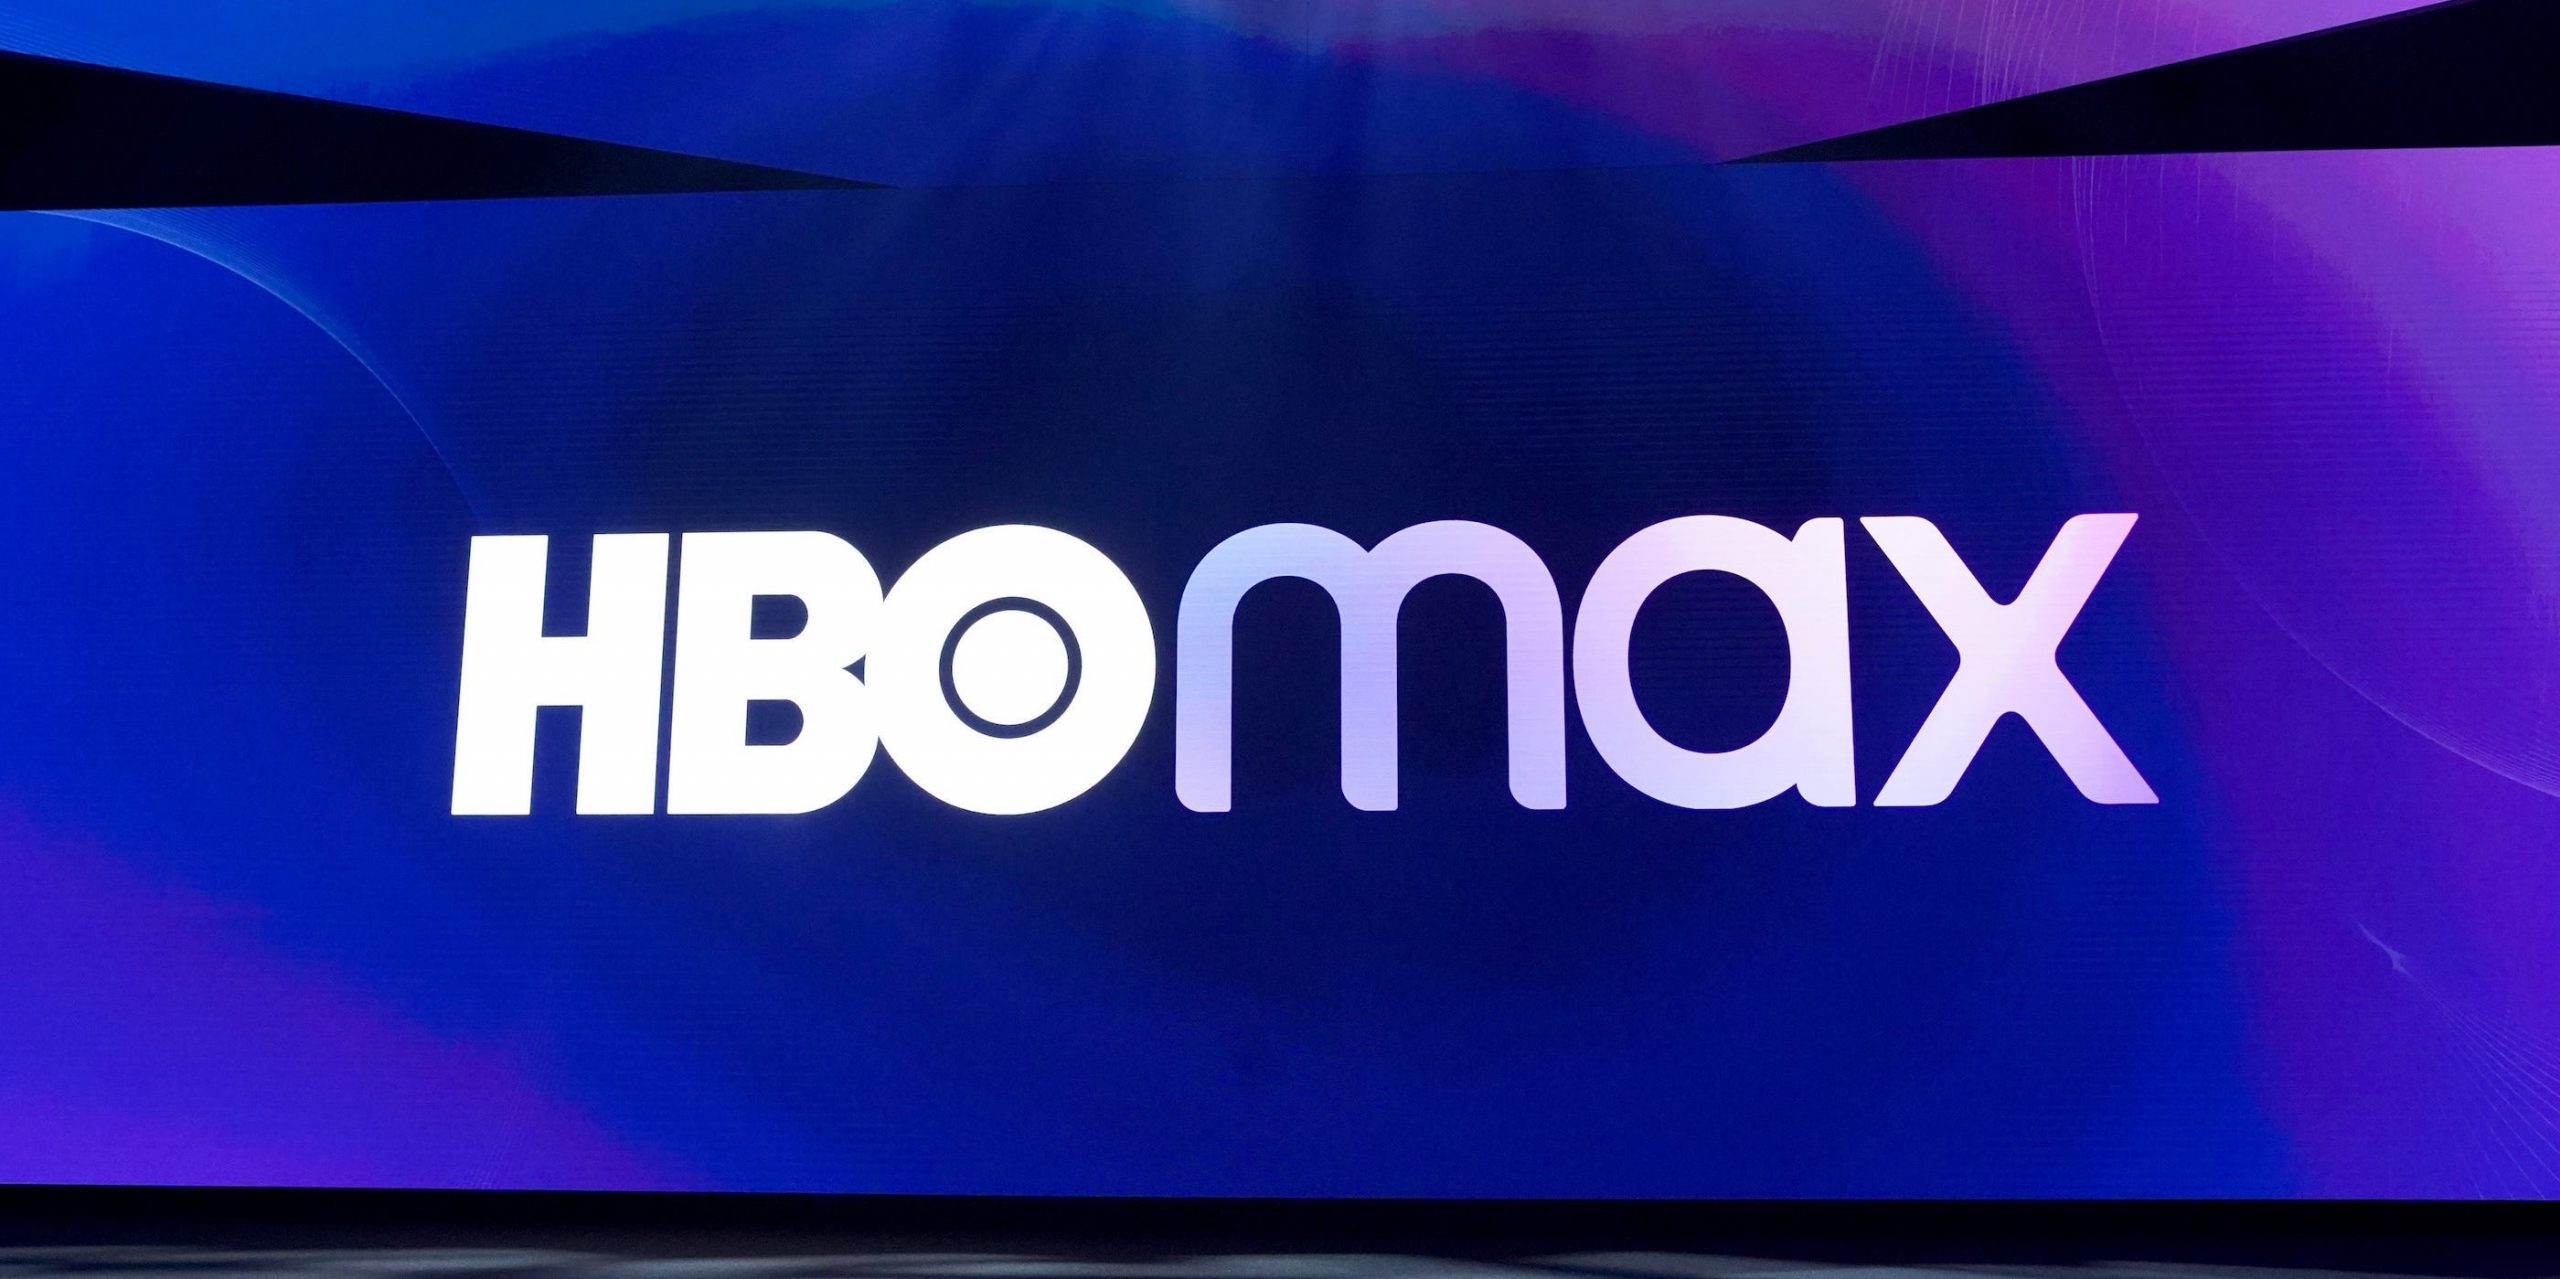 The HBO Max logo displayed on a large screen.